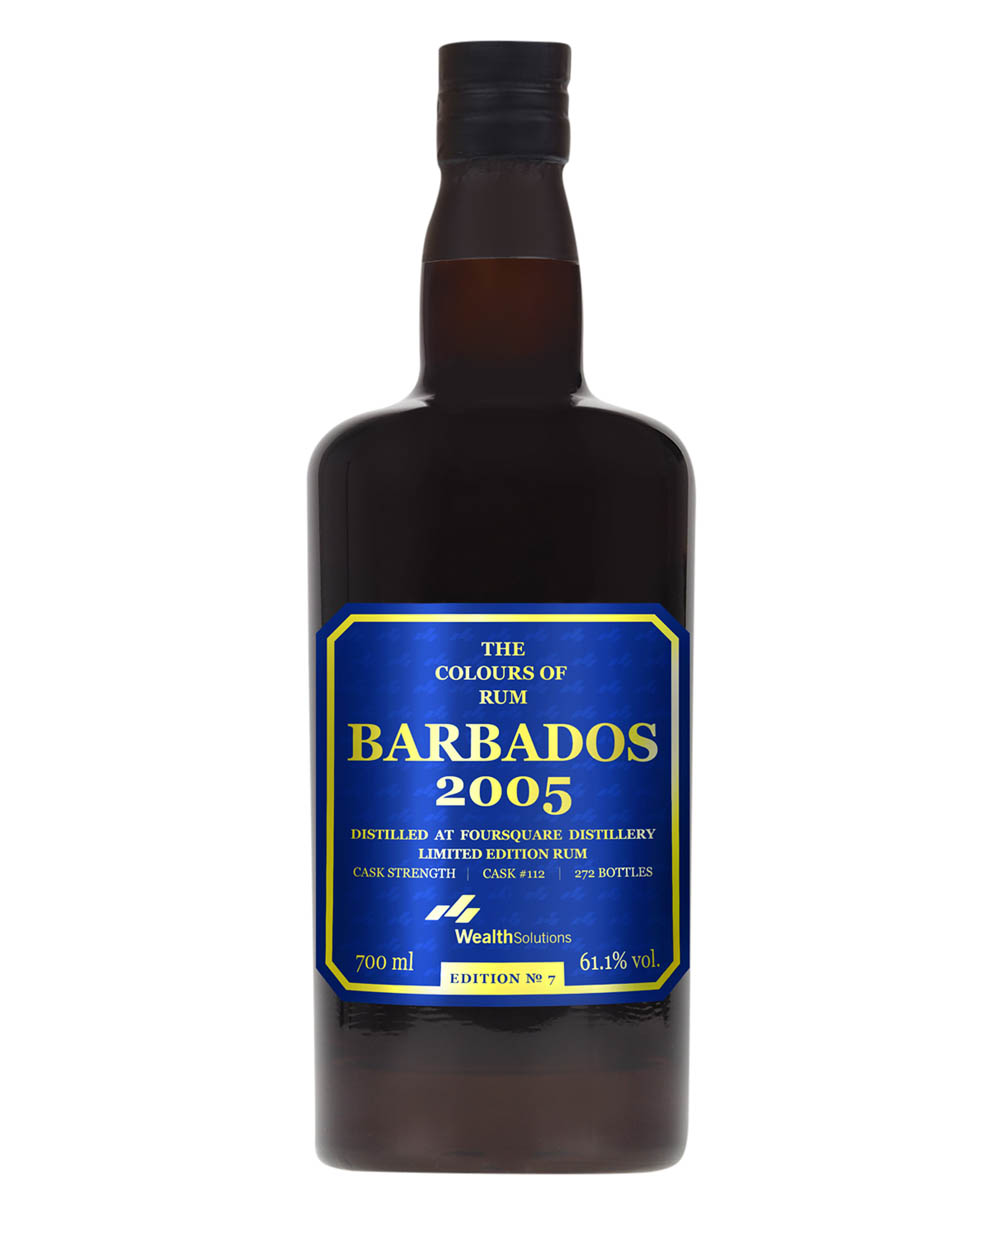 Foursquare Barbados 2005 The Colours Of Rum Edition 7 Musthave Malts MHM